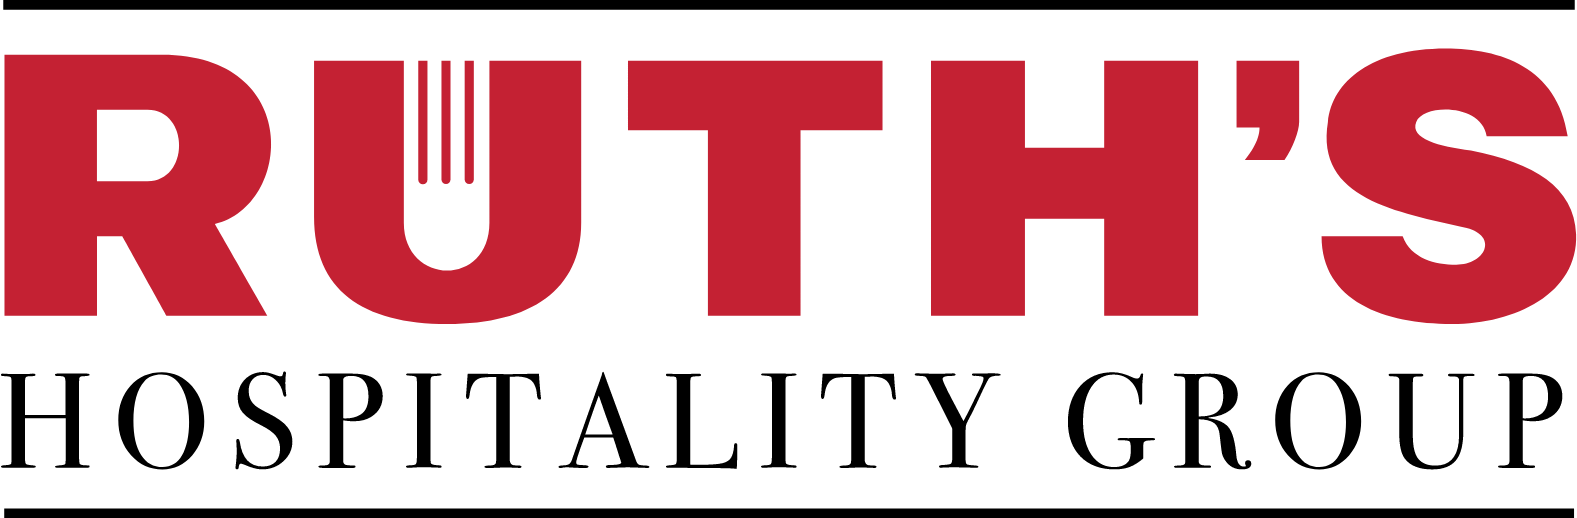 Ruth's Hospitality Group logo large (transparent PNG)